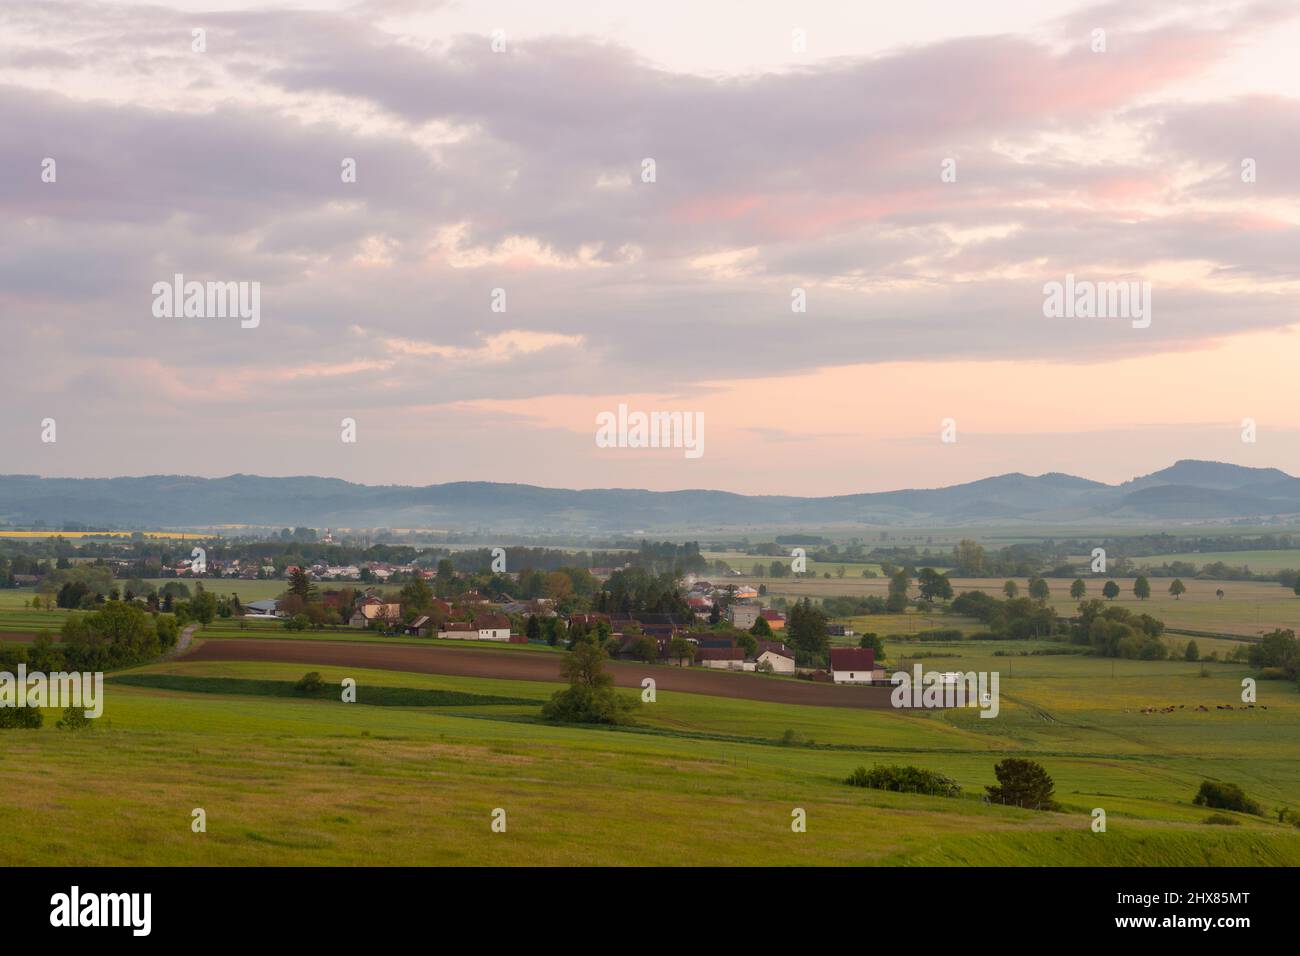 Blazovce village and rural landscape of Turiec basin, Slovakia. Stock Photo